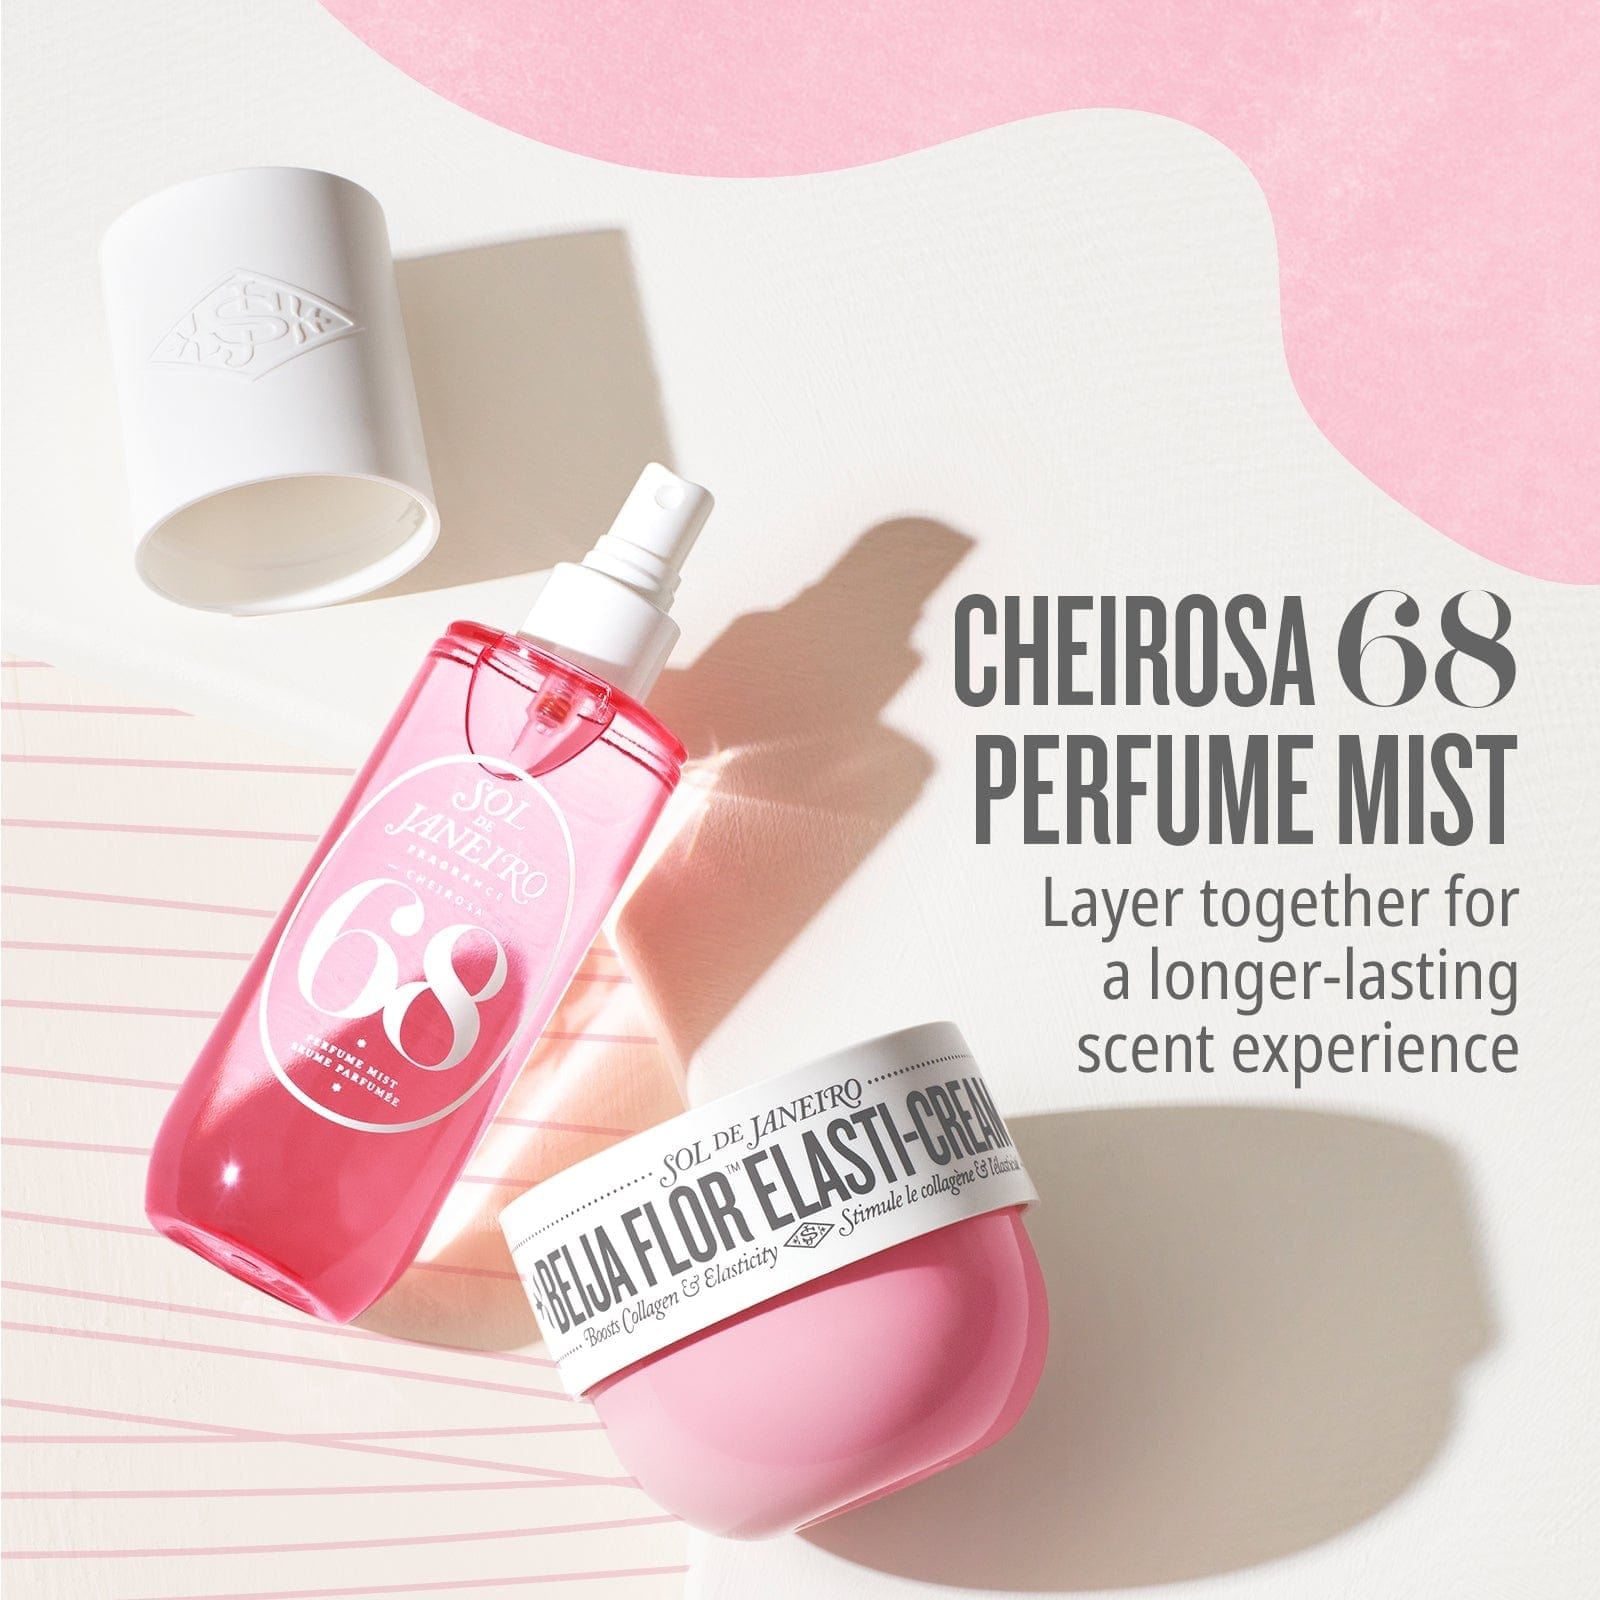 Cheirosa 68 perfume mist - layer together for a longer-lasing scent experience